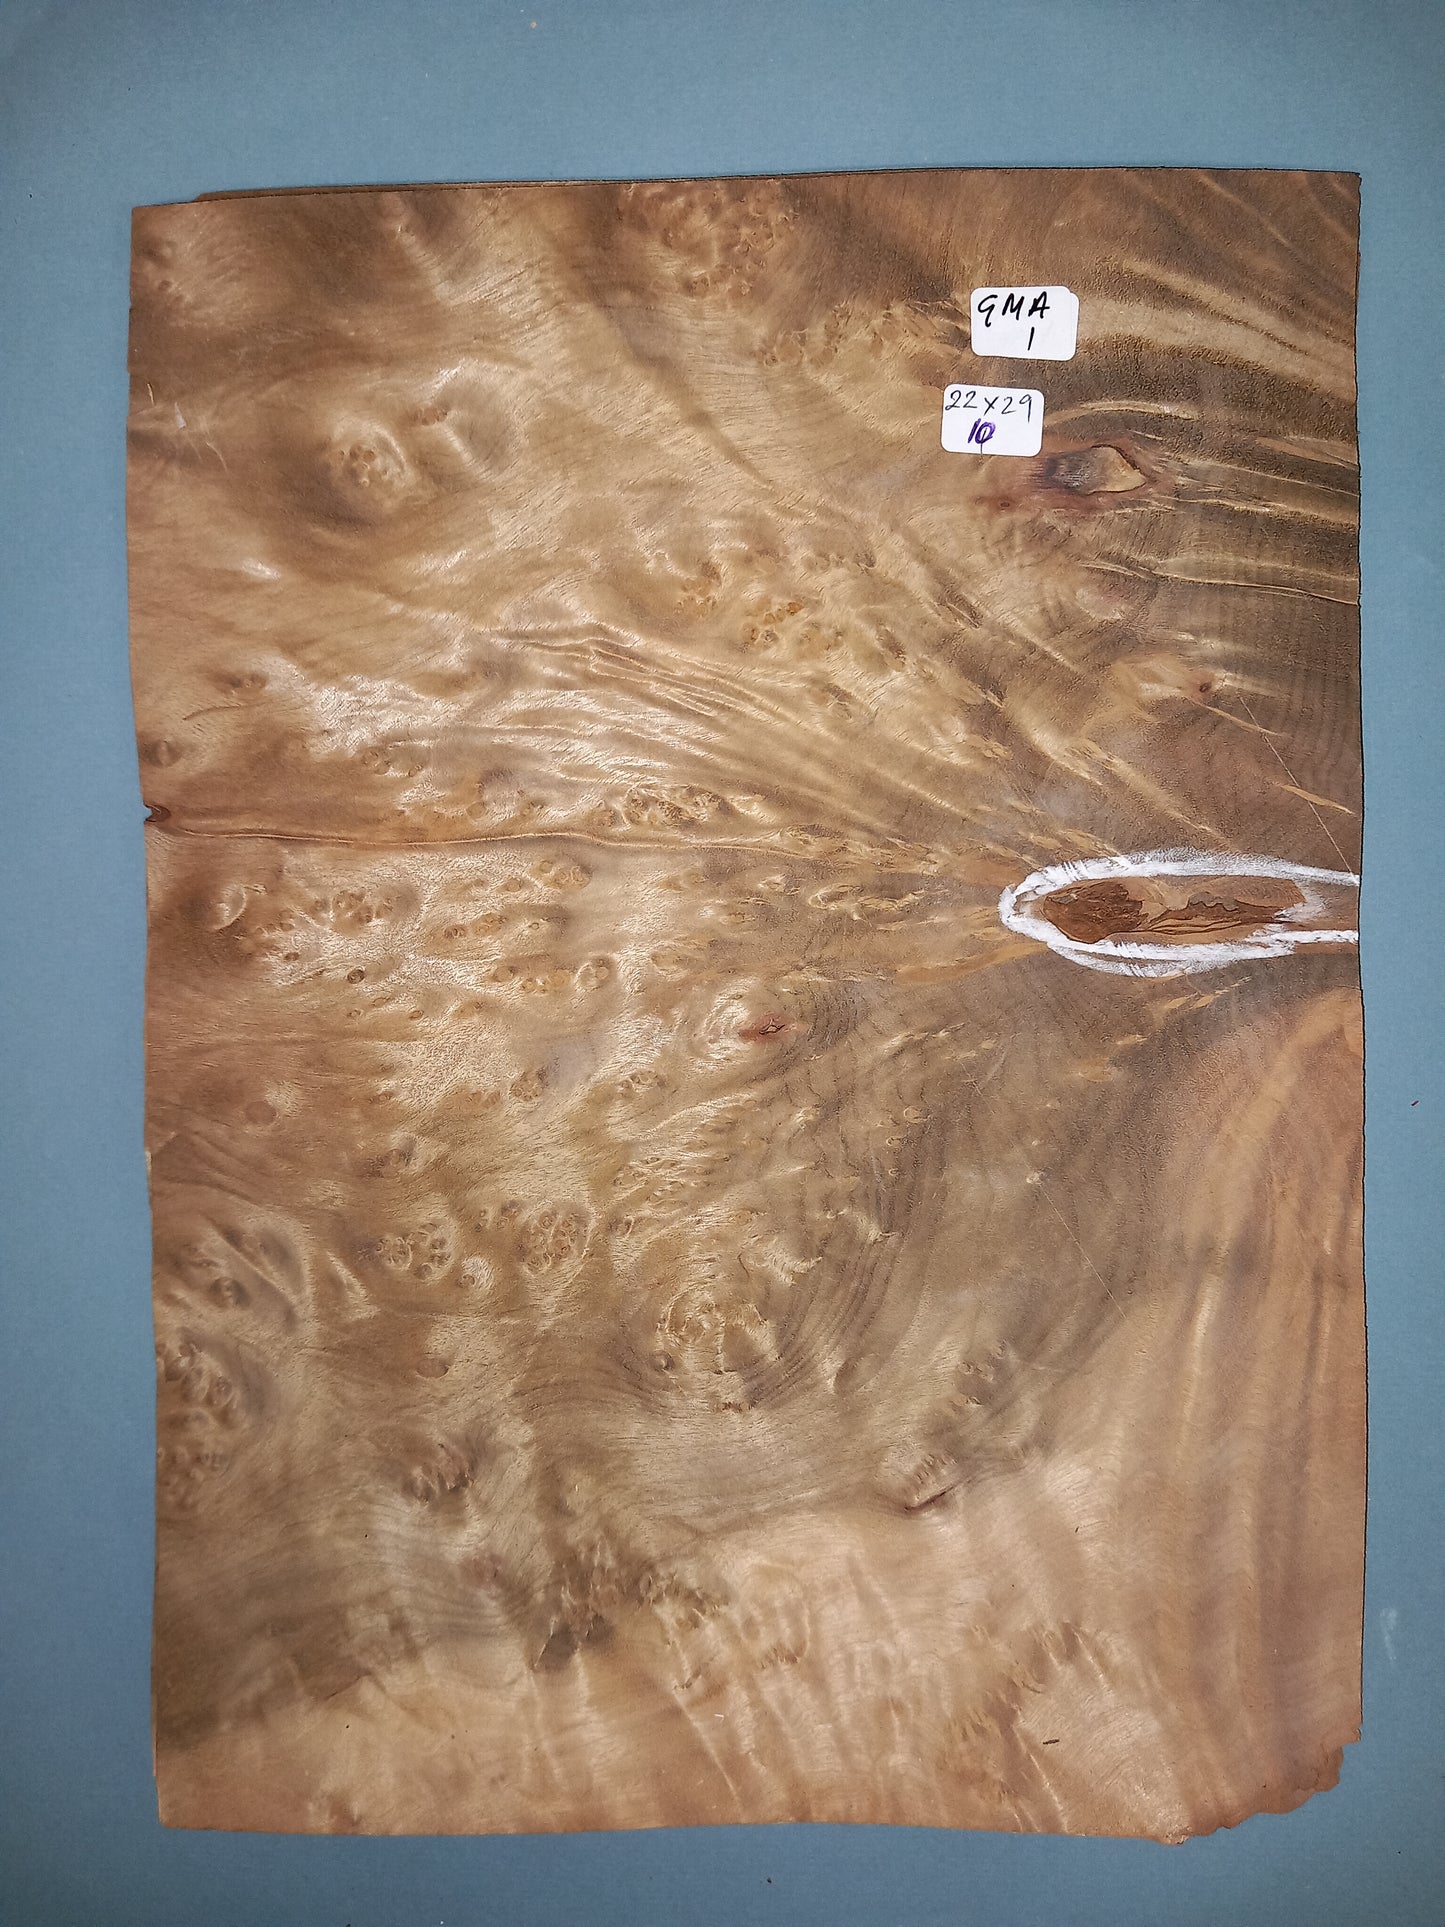 CONSECUTIVE SHEETS OF GOLDEN MADRONE BURR VENEER  22 X 29 CM